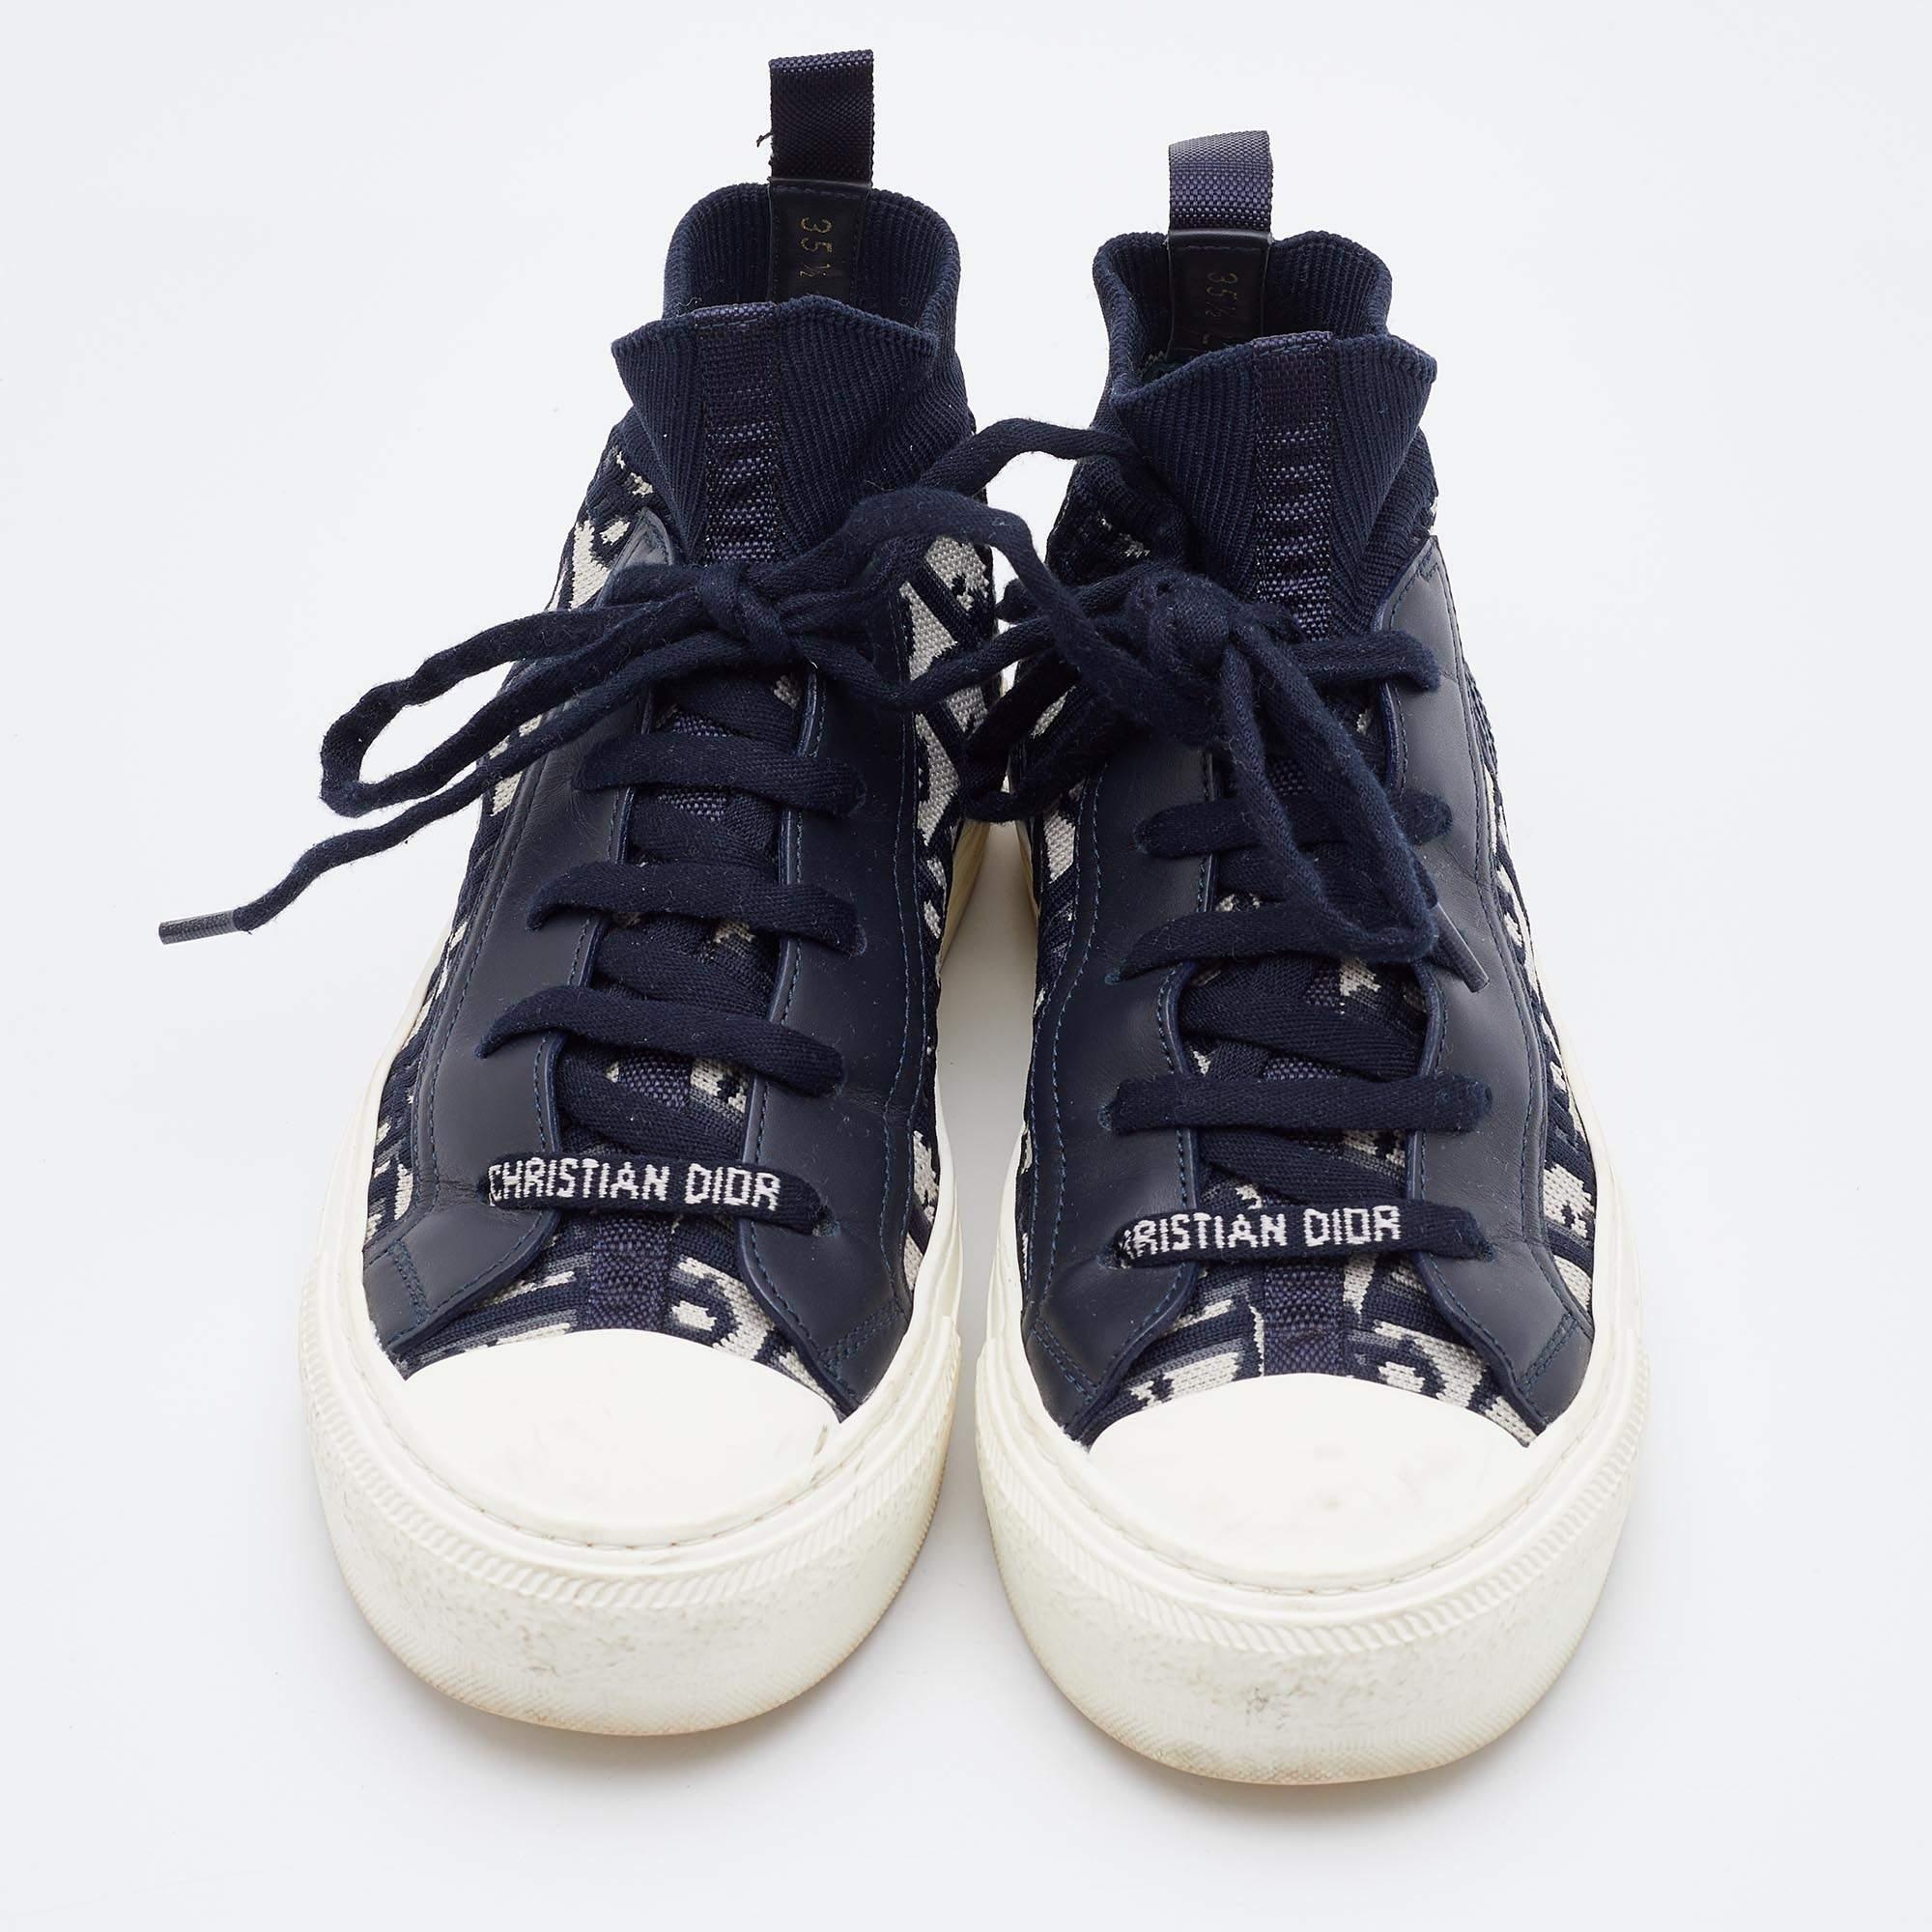 Packed with style and comfort, these Dior sneakers are gentle on the feet so that you can glide through the day. They have a sleek upper with lace closure, and they're set on durable rubber soles.

Includes: Original Dustbag

